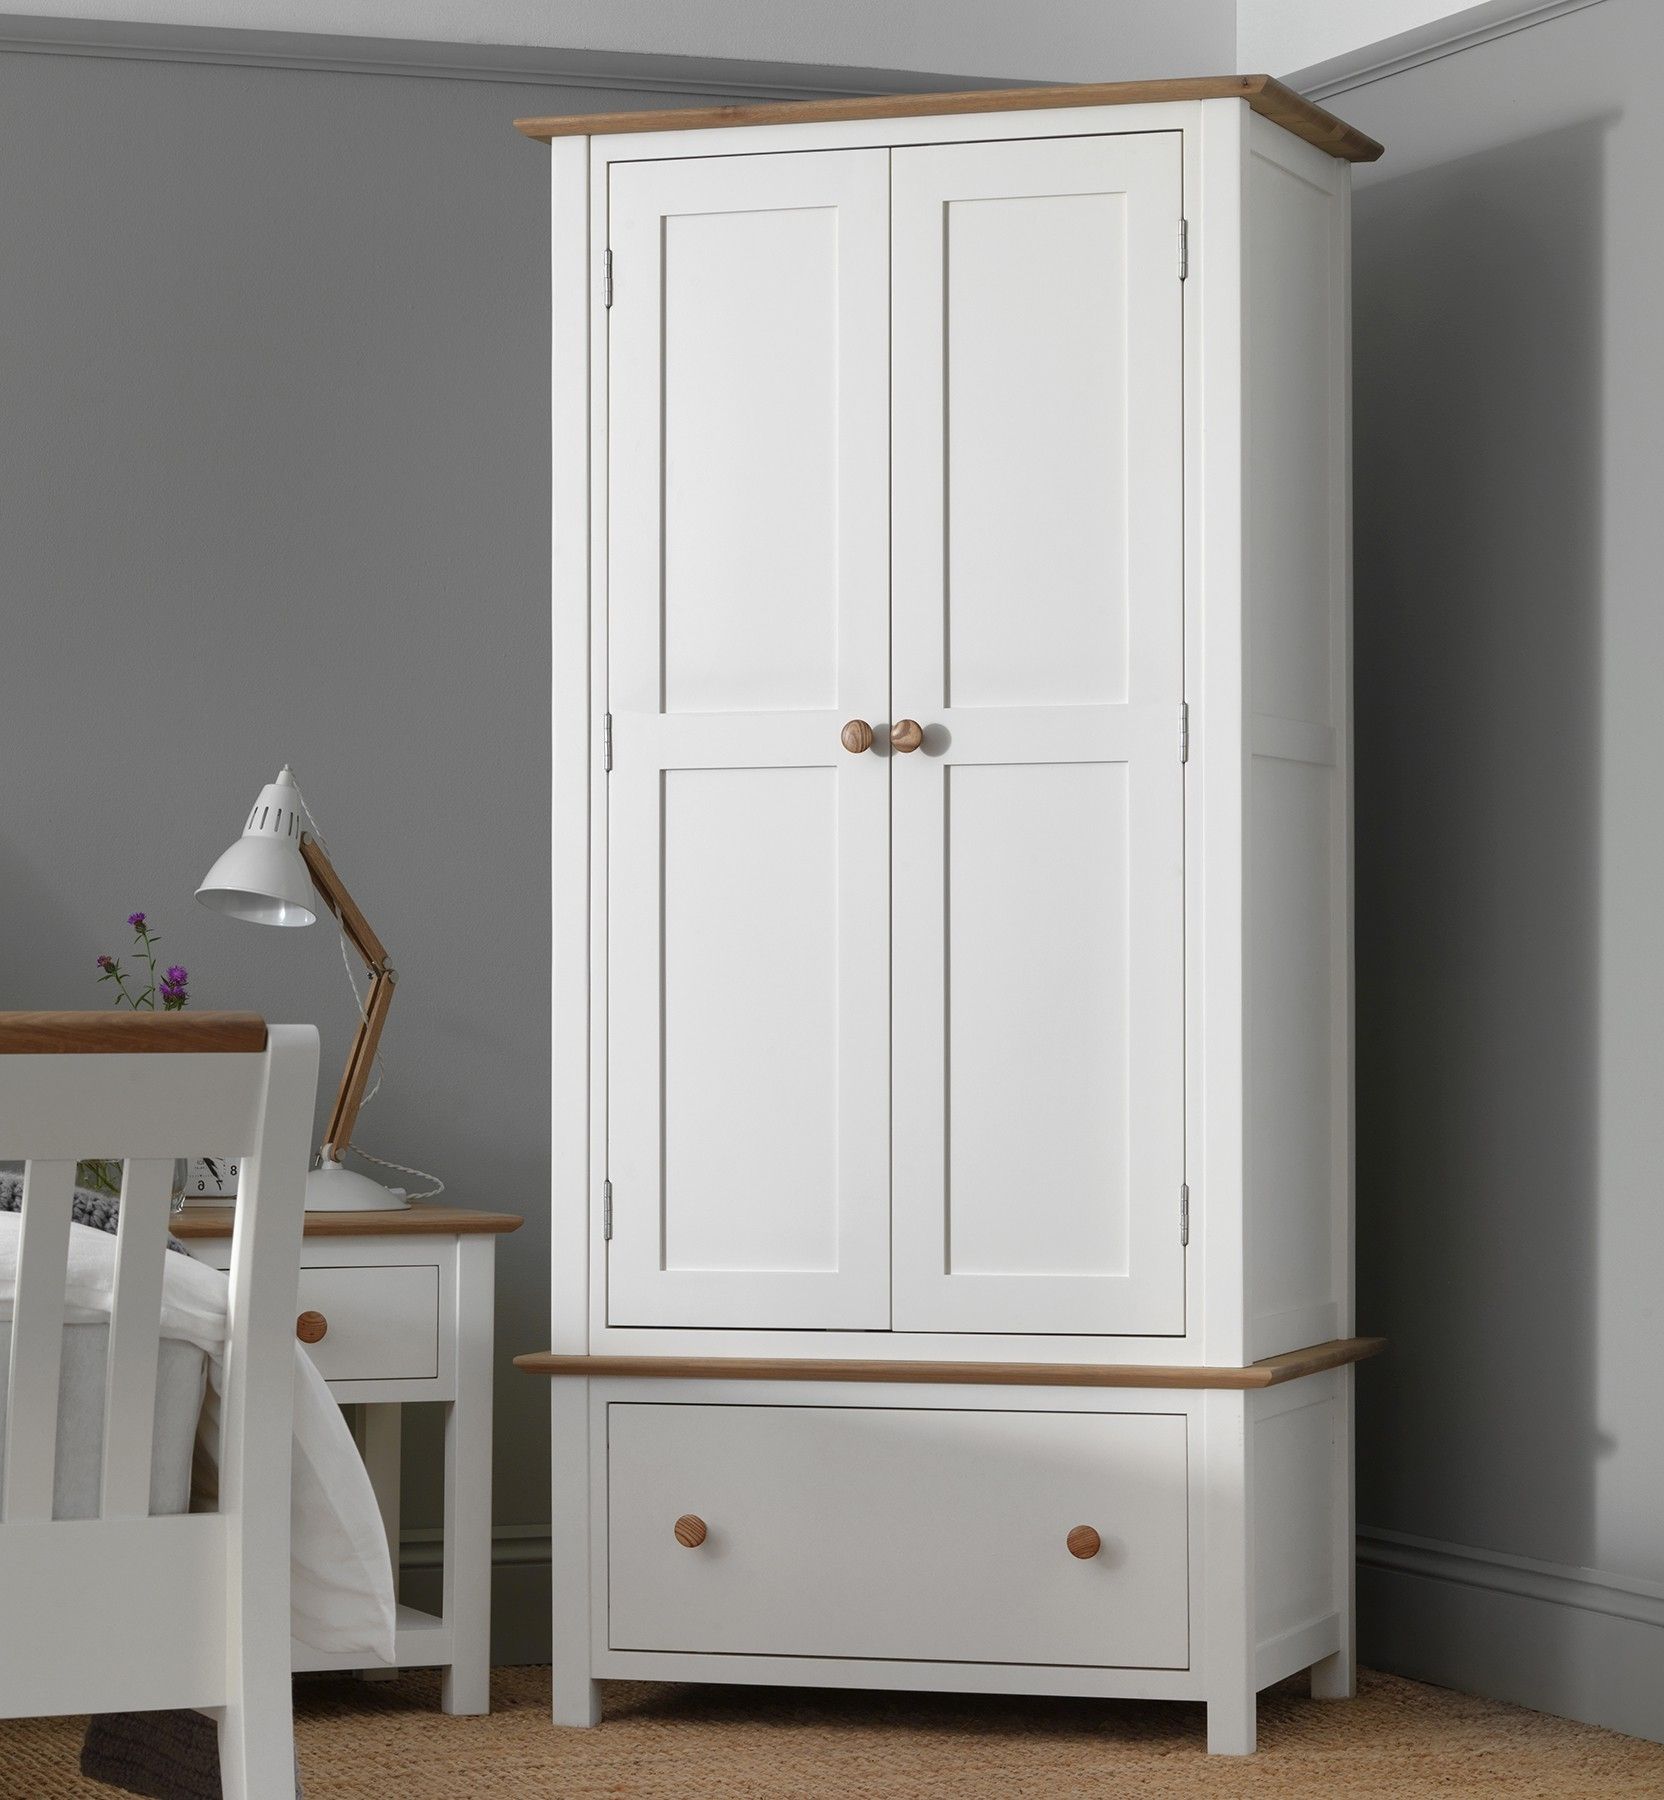 White Wood Wardrobes With Drawers Inside Favorite White Wood Wardrobe With Drawers • Drawer Ideas (View 2 of 15)